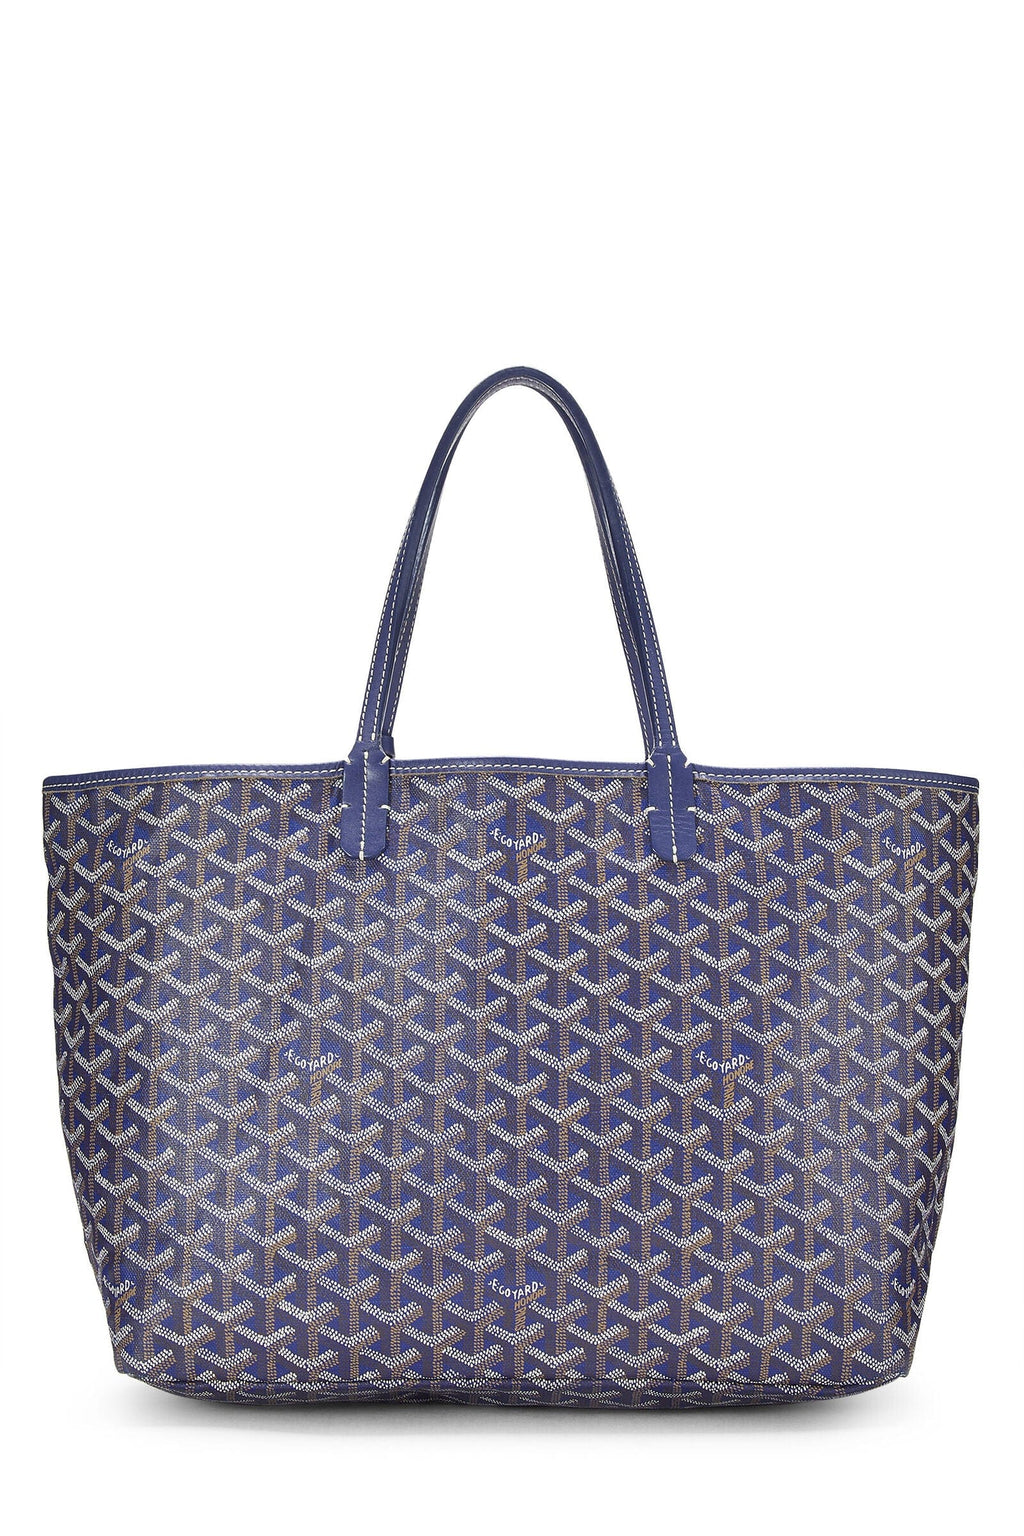 What Are Goyard Bags Made Of